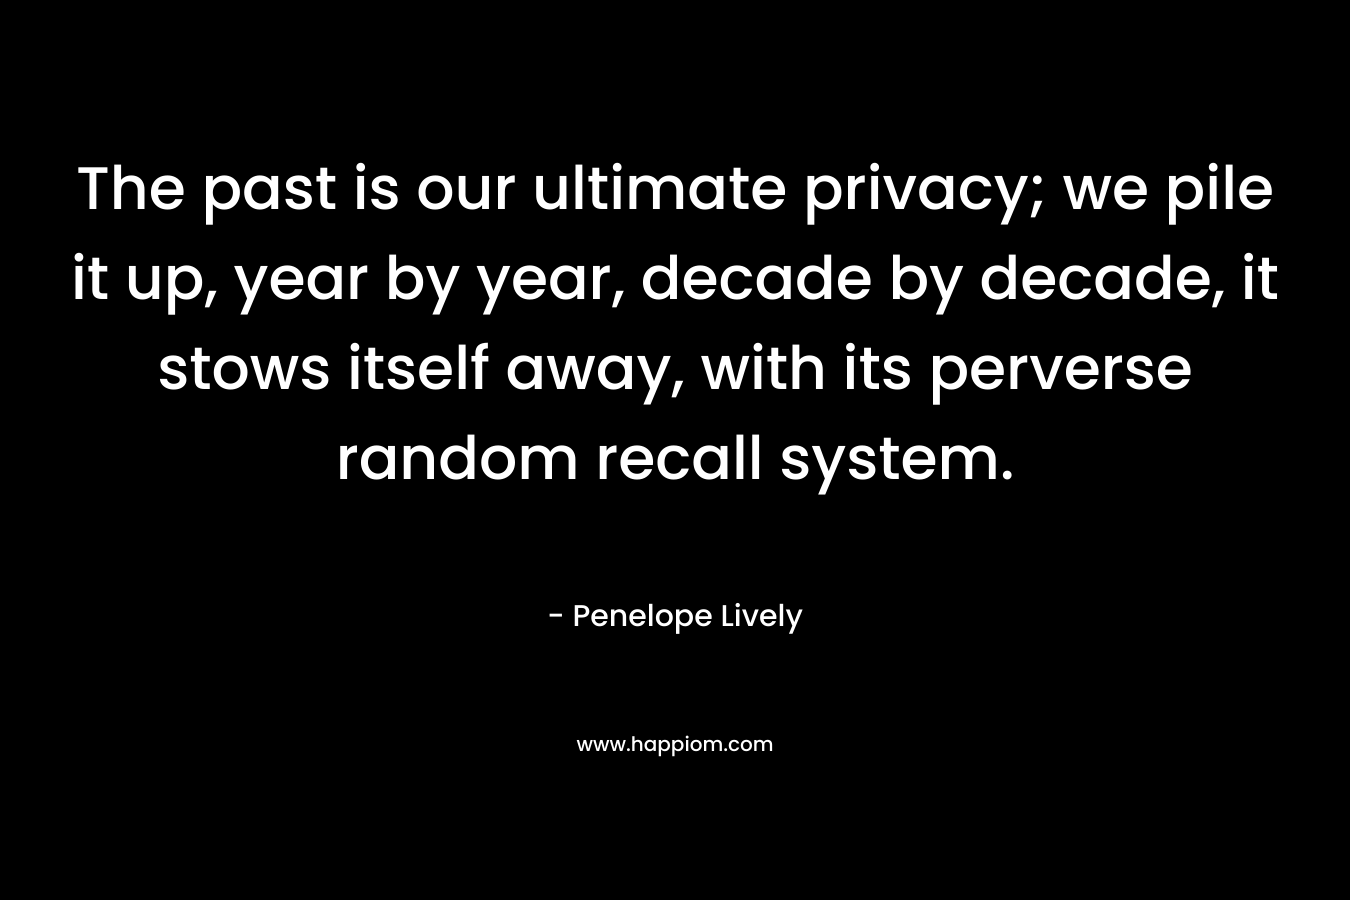 The past is our ultimate privacy; we pile it up, year by year, decade by decade, it stows itself away, with its perverse random recall system. – Penelope Lively